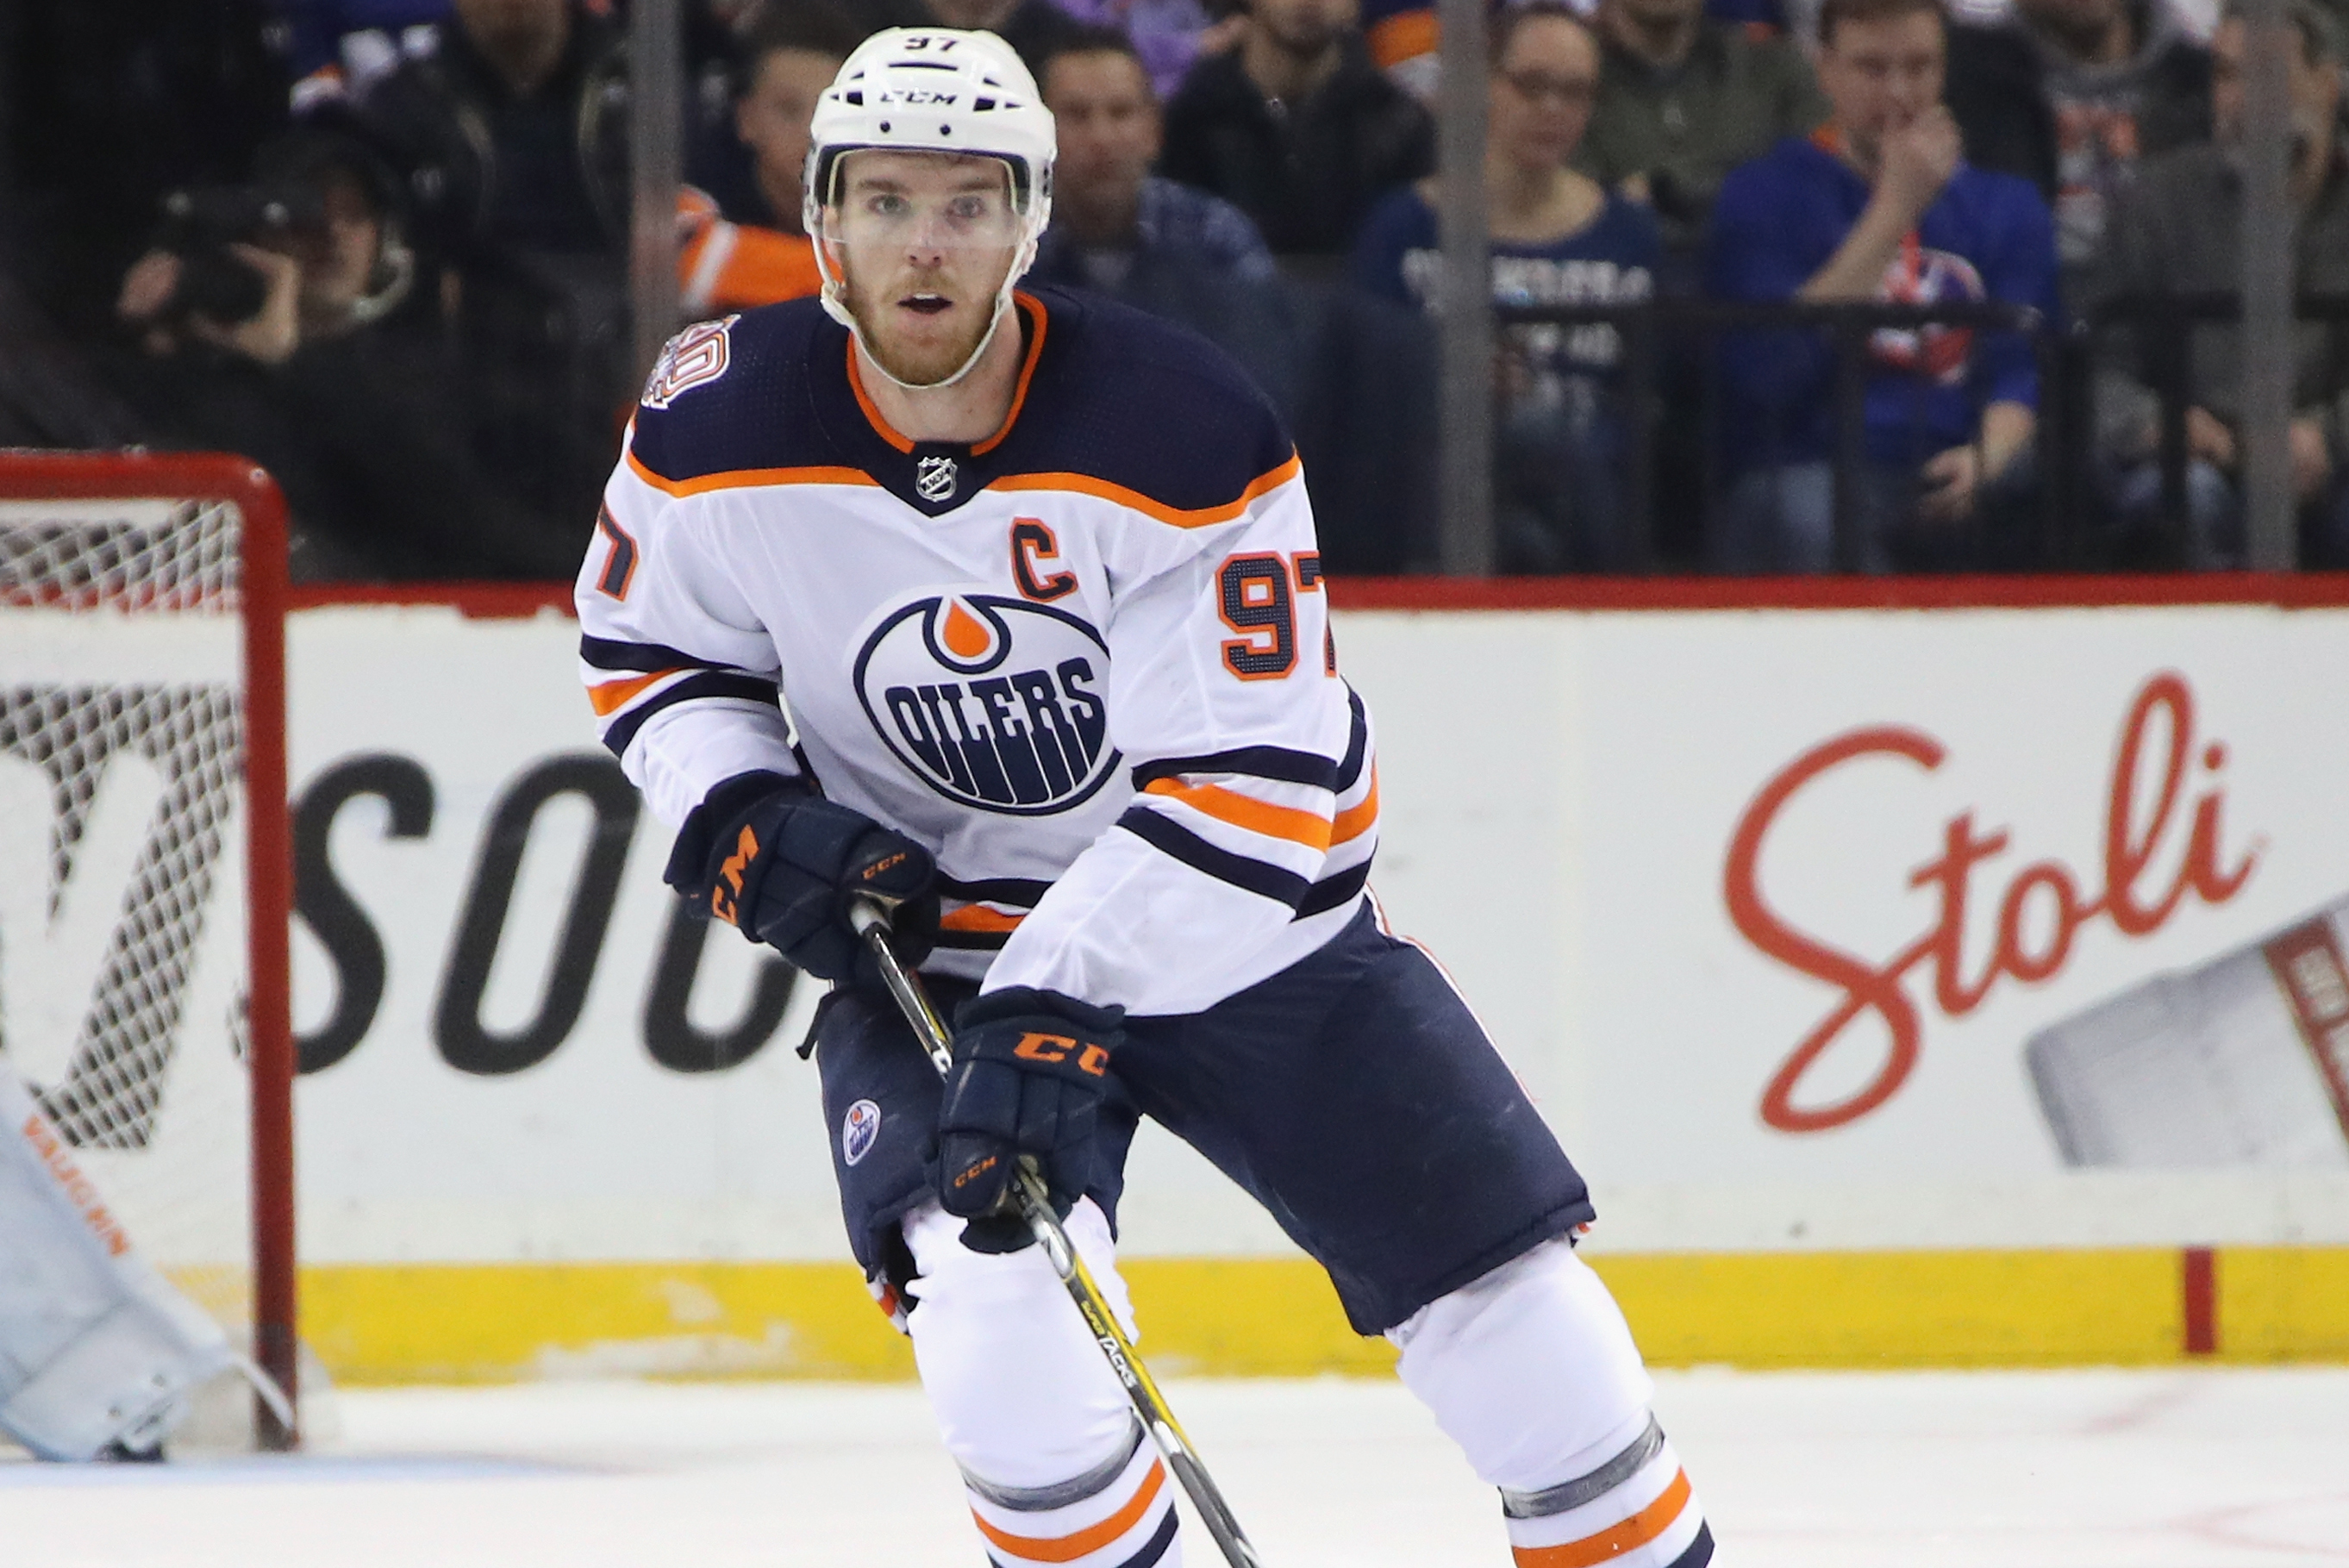 Oilers' Connor McDavid reveals key to cementing legacy as all-time